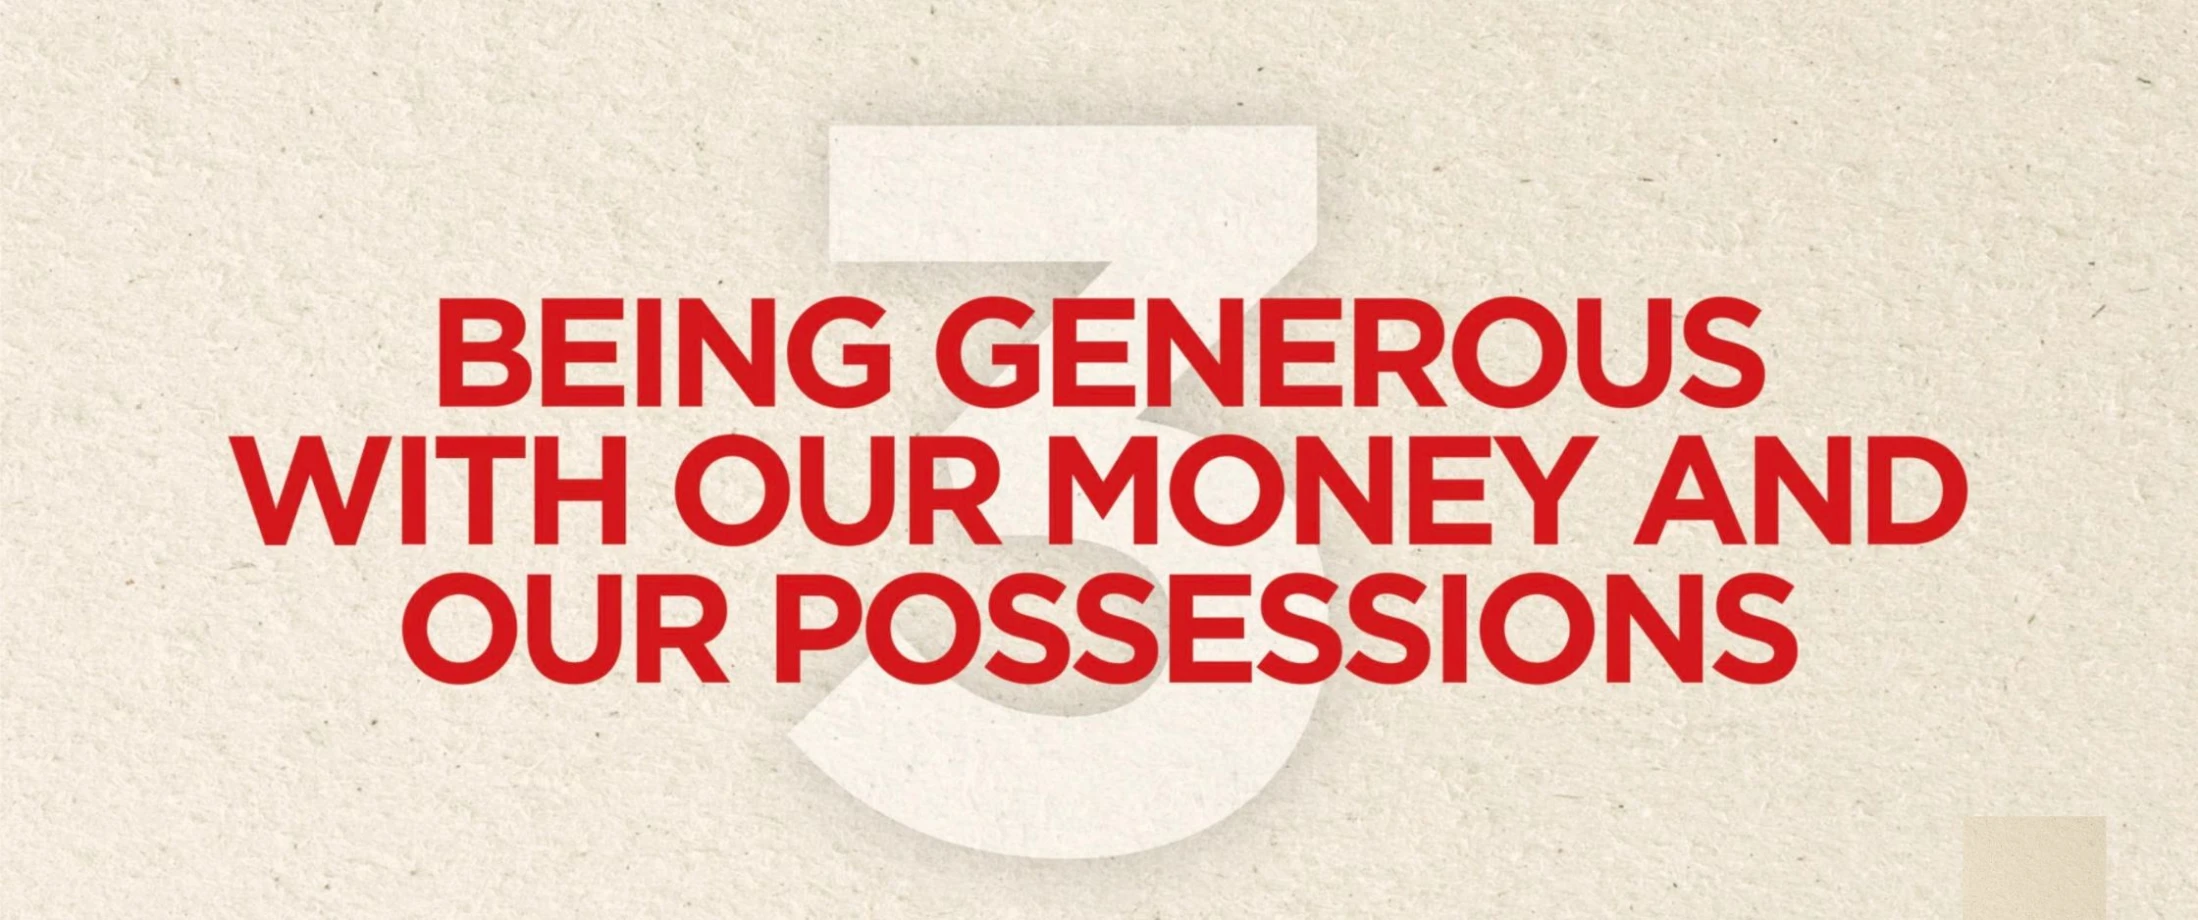 Being Generous With Our Money and Possessions